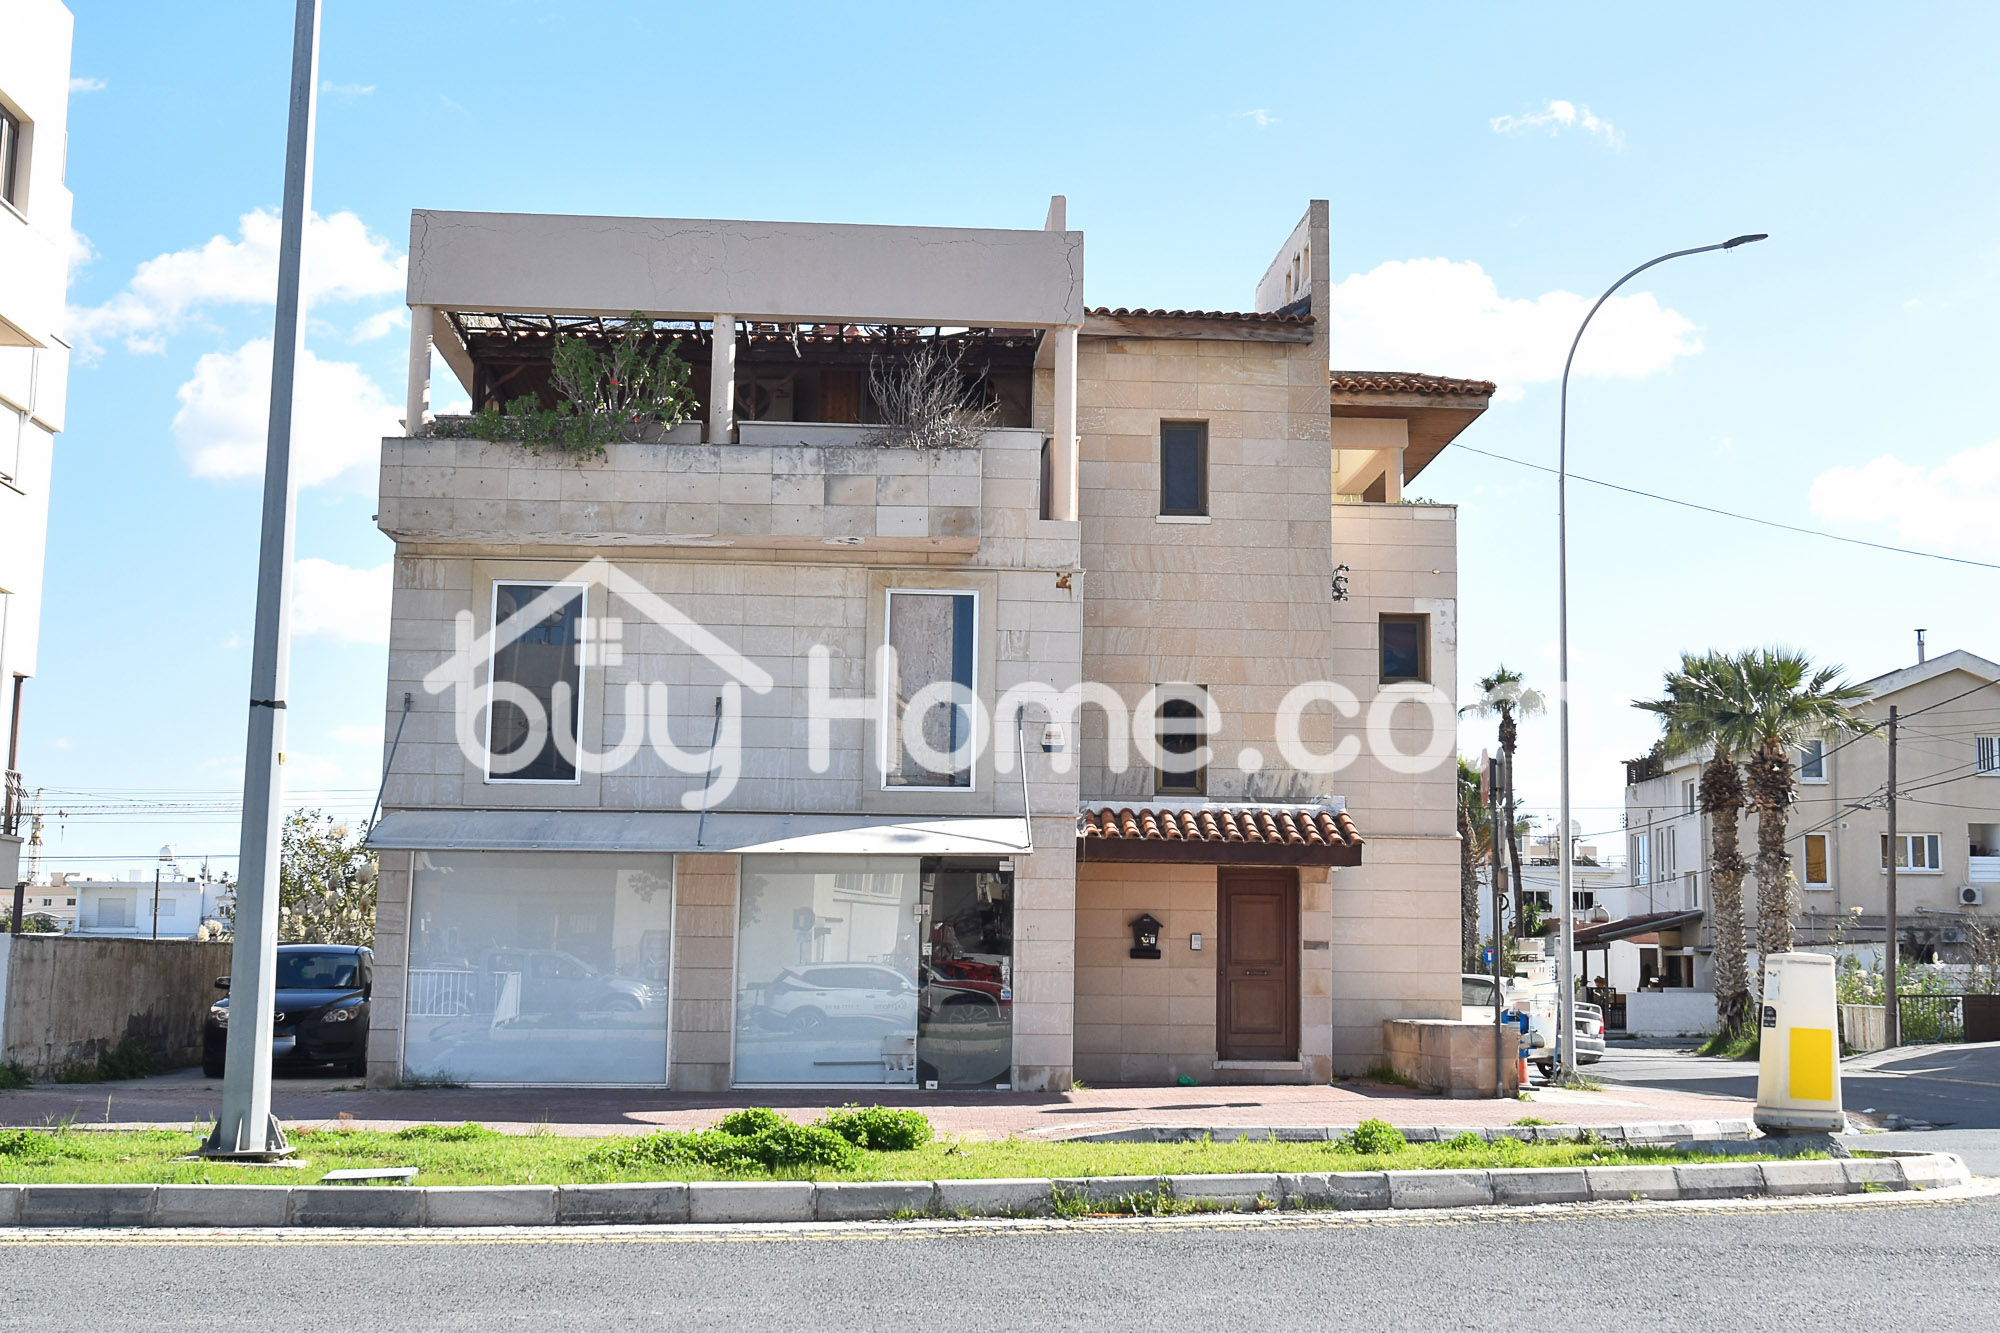 Residential building with Shop | BuyHome